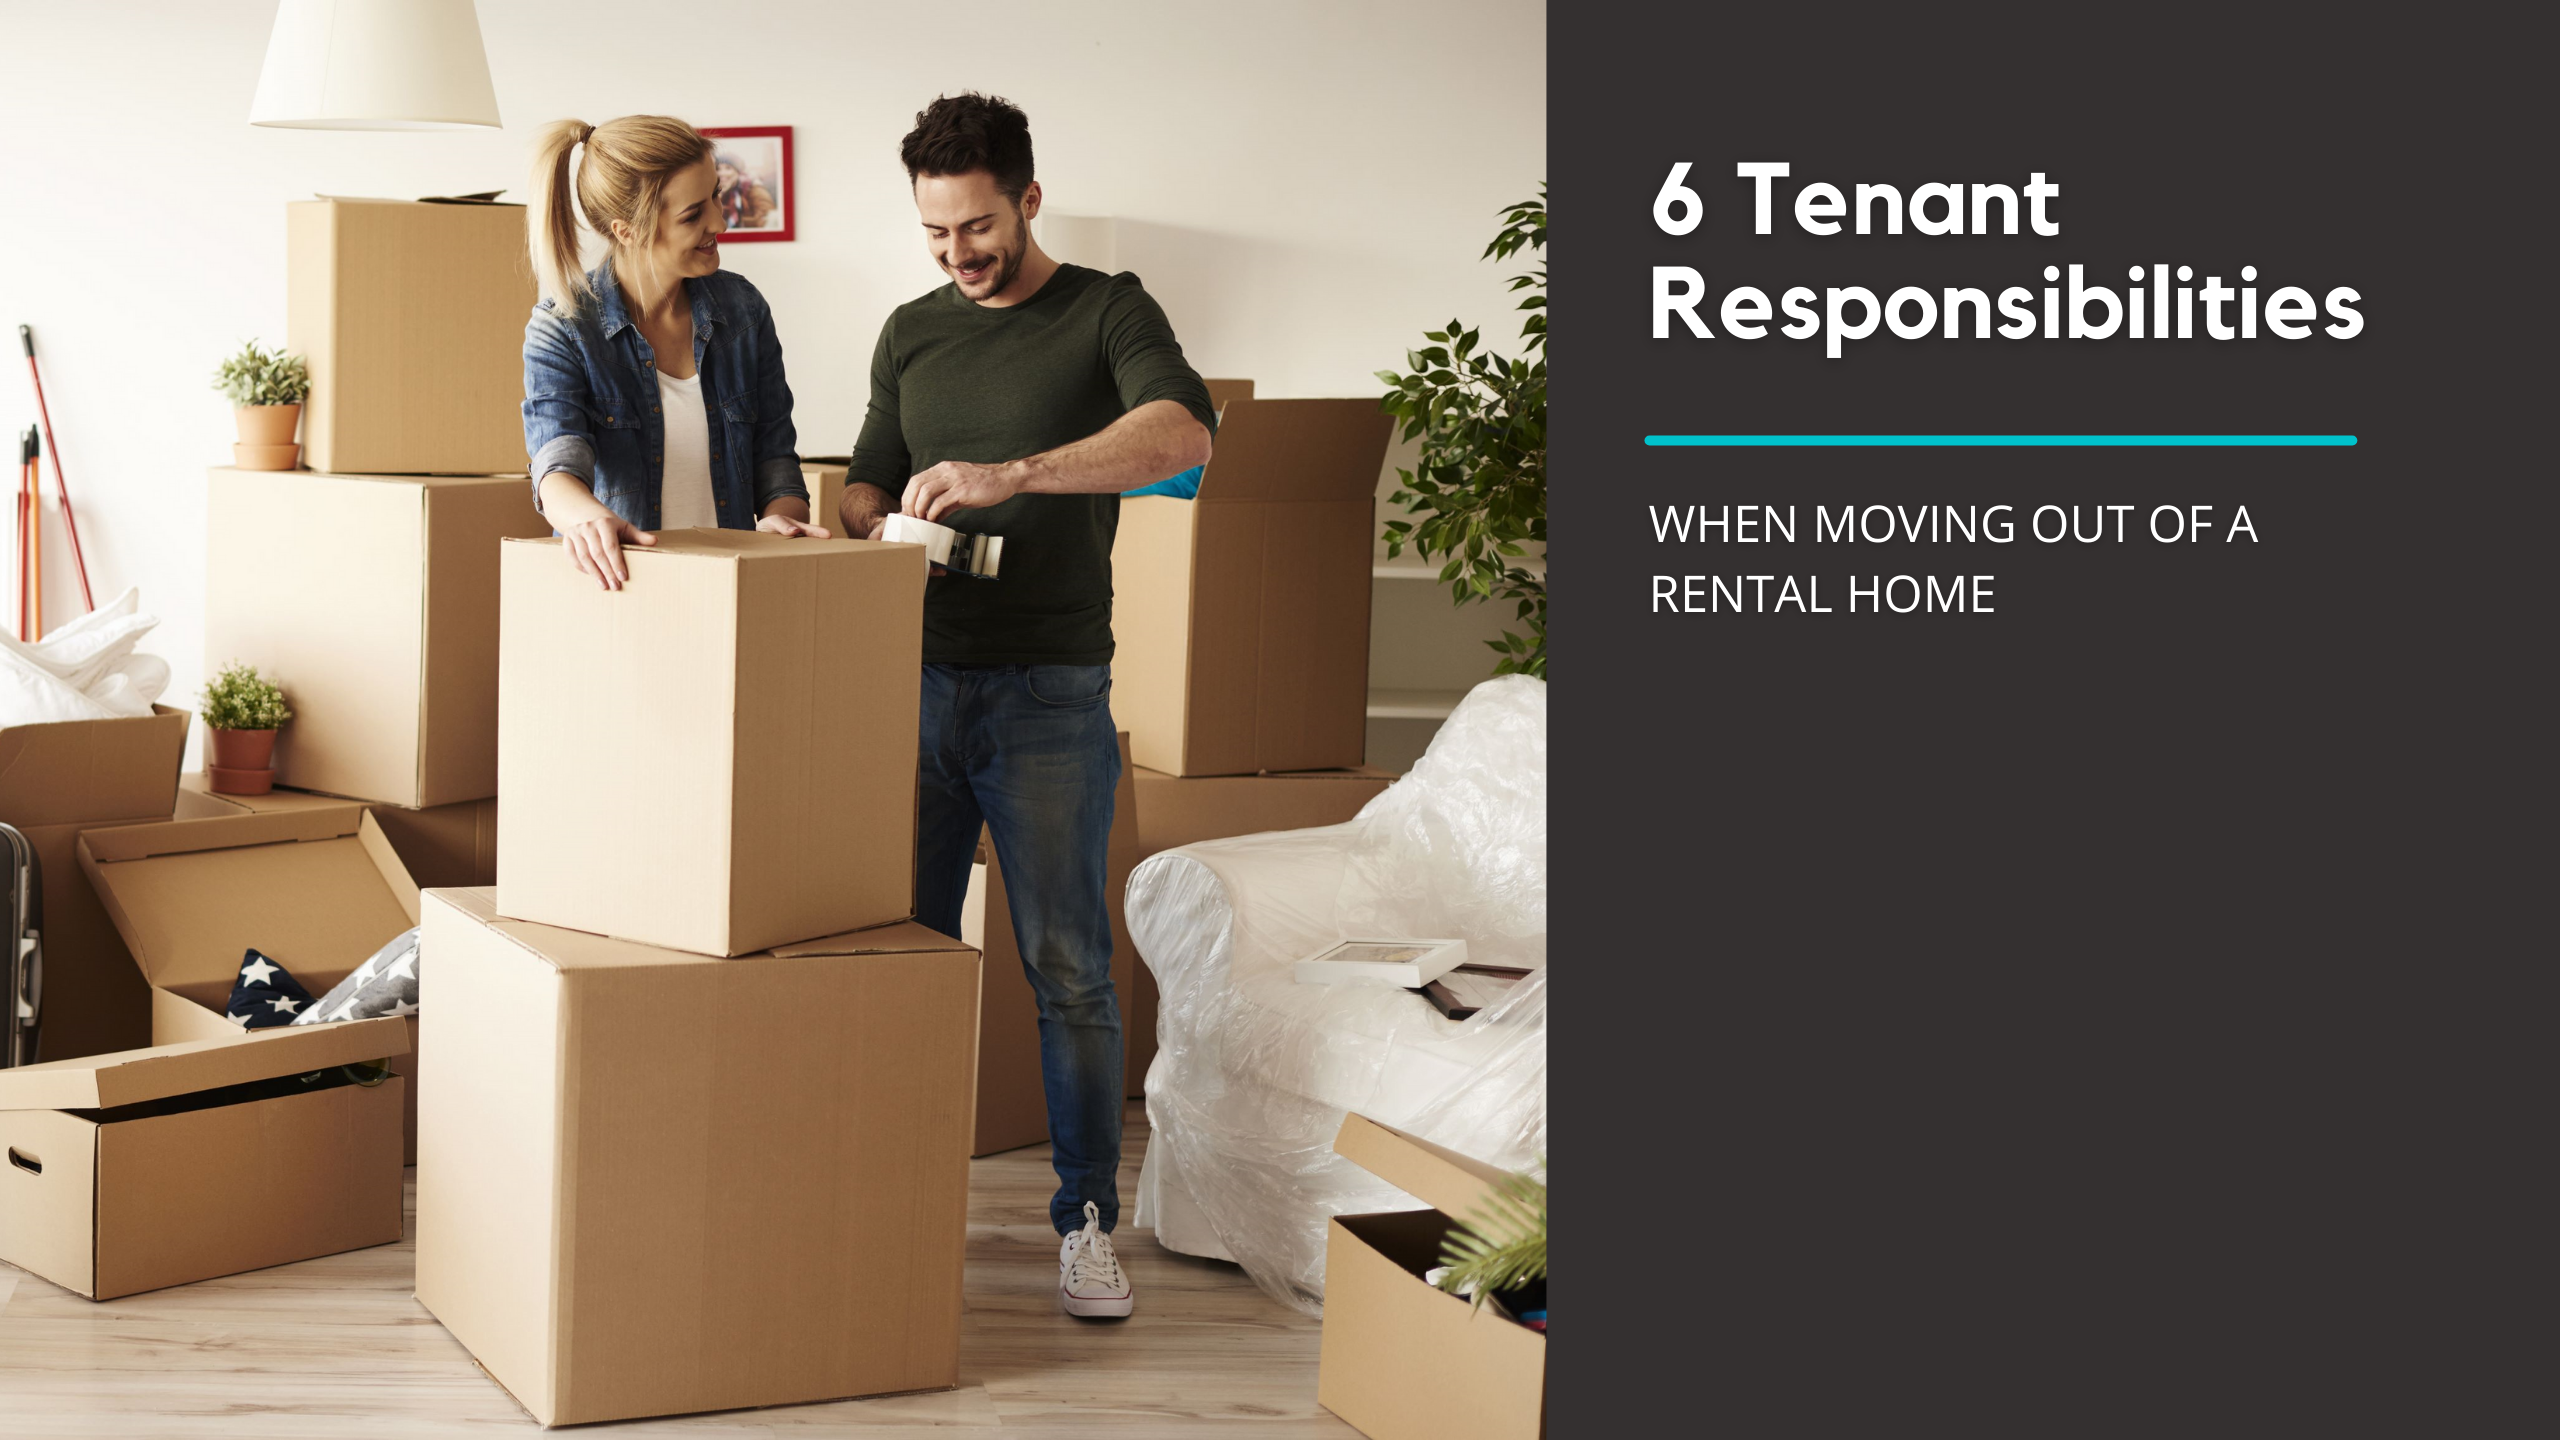 Blog on 6 Tenant Responsibilities When Moving out of a Rental